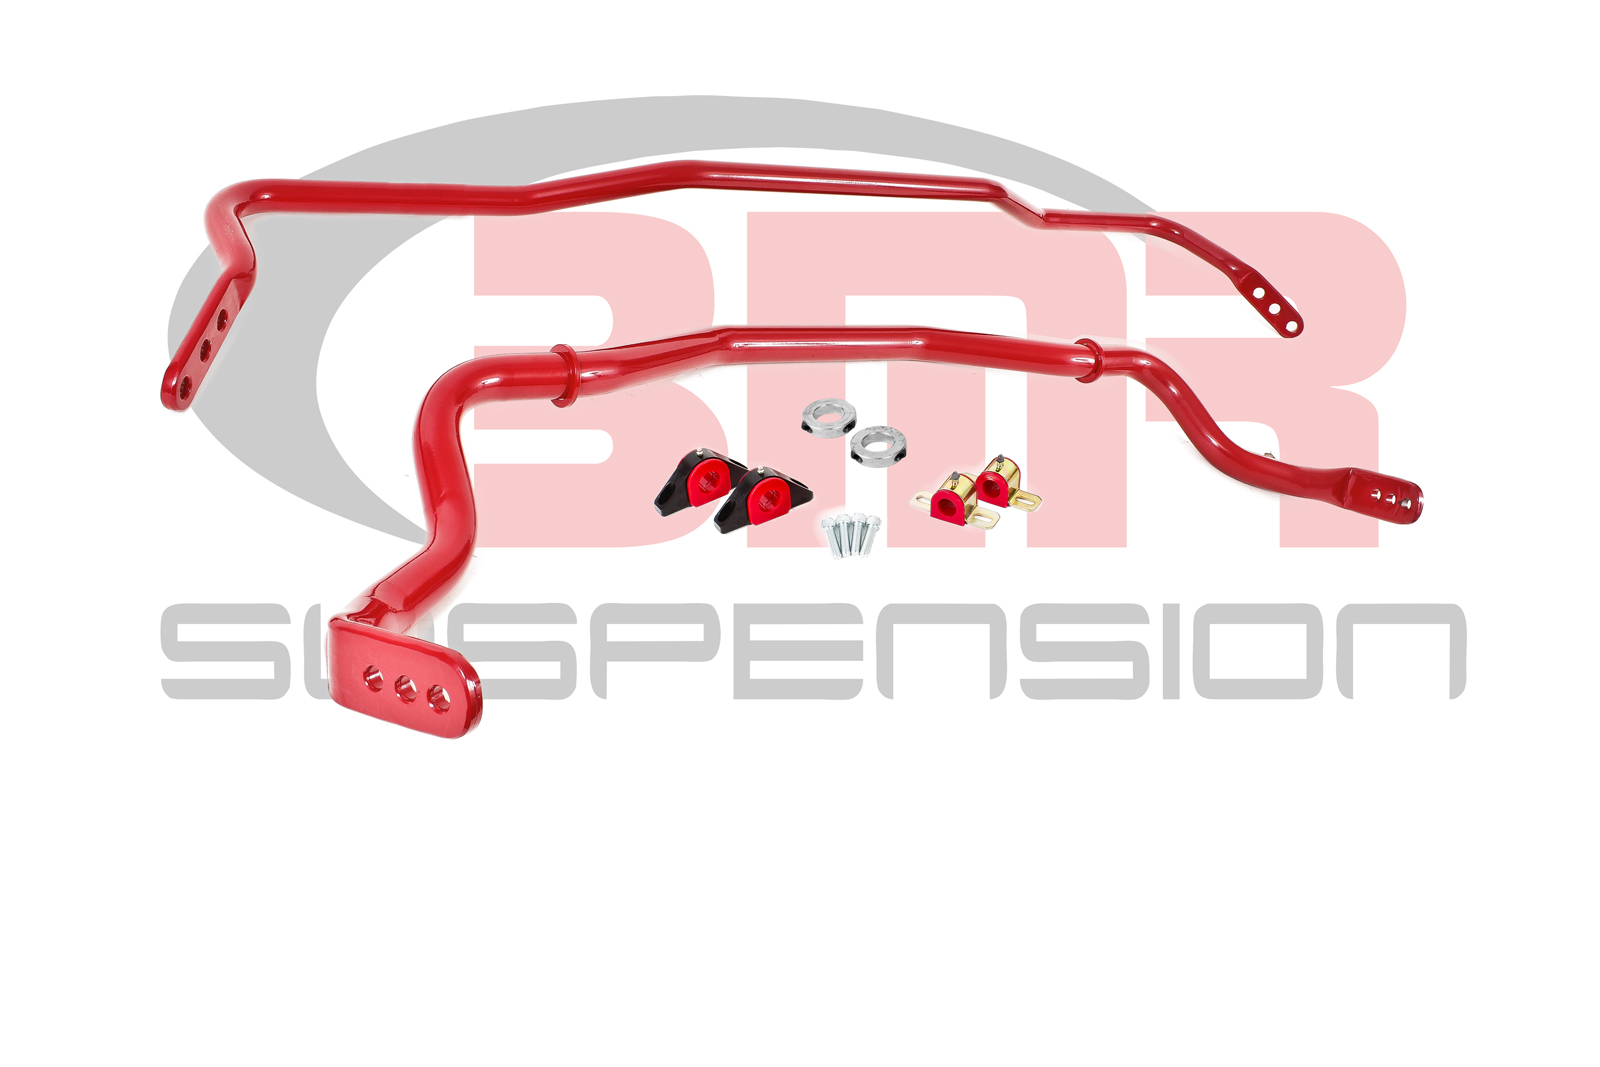 Sway Bar Kit With Bushings, Front (SB044), Rear (SB045), Fits all S550 Mustangs, BMR Suspension - SB043R